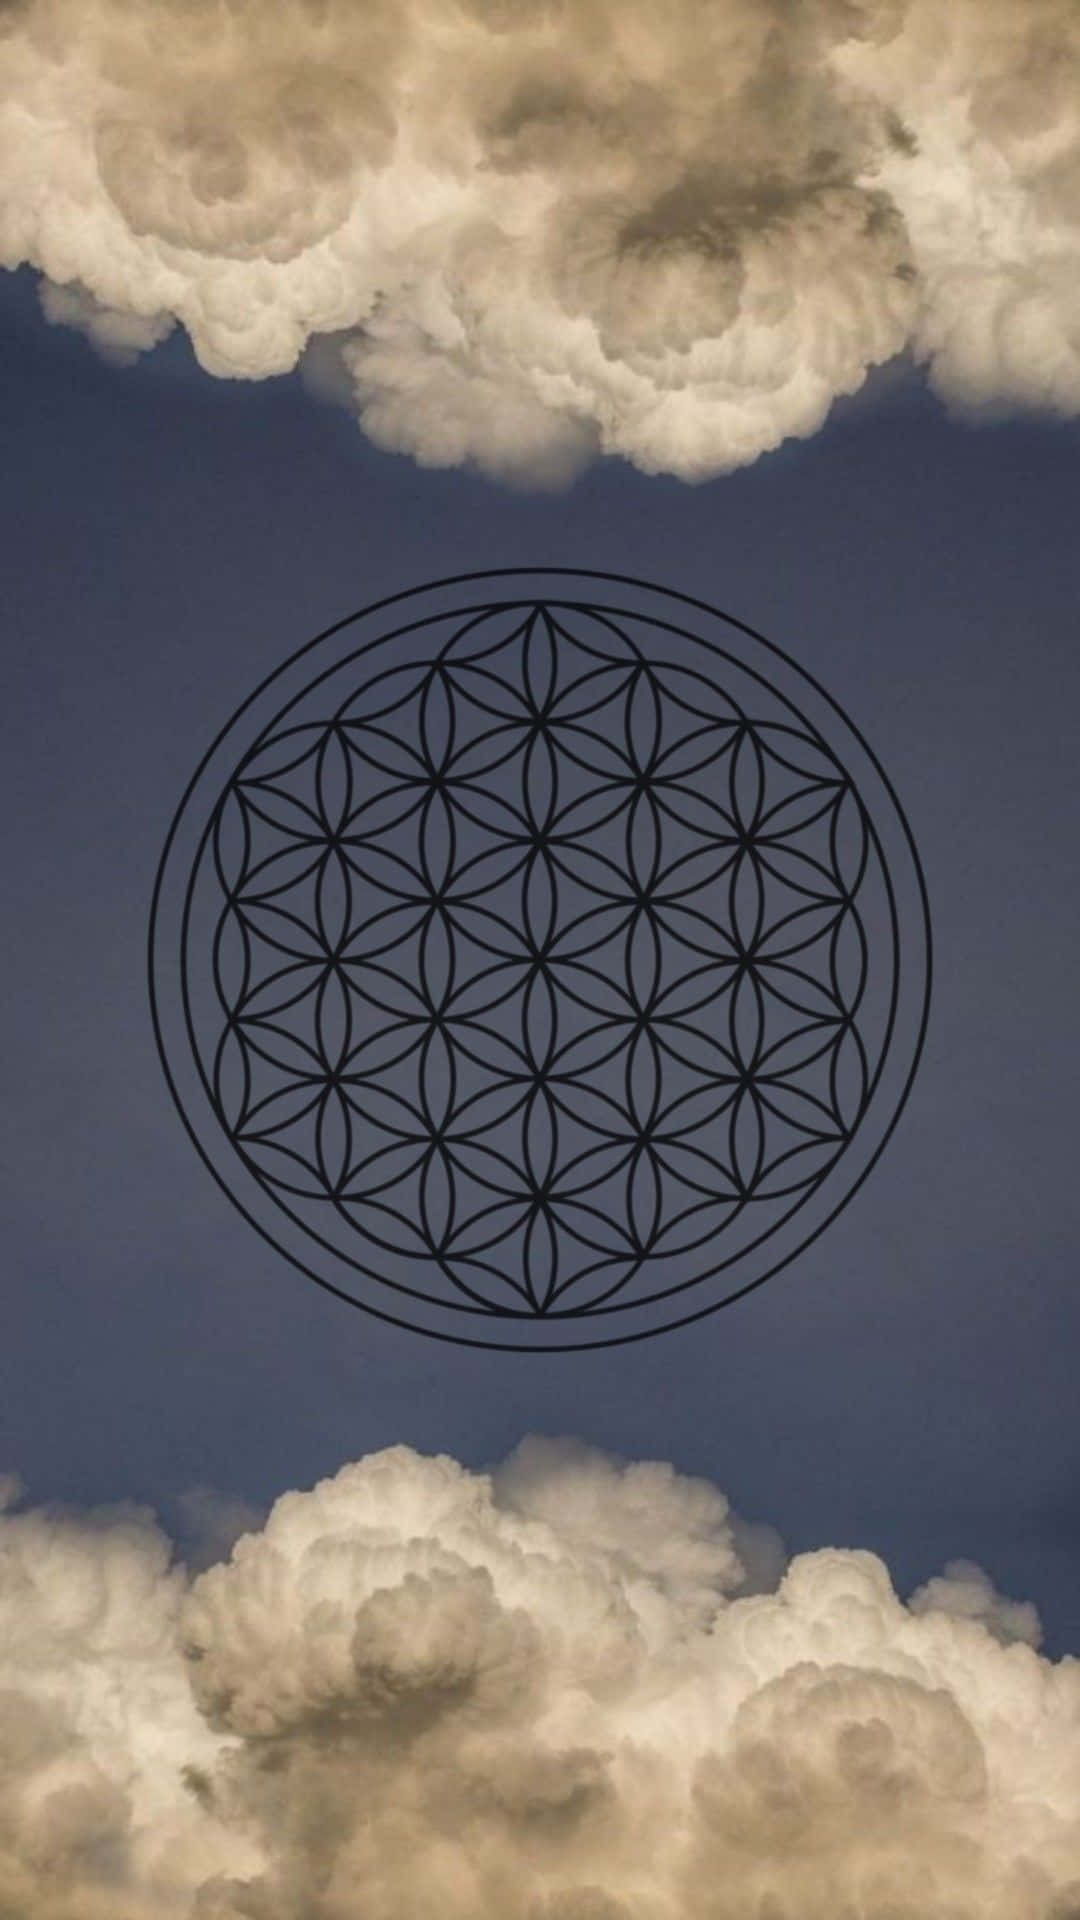 Flower Of Life In The Clouds Wallpaper